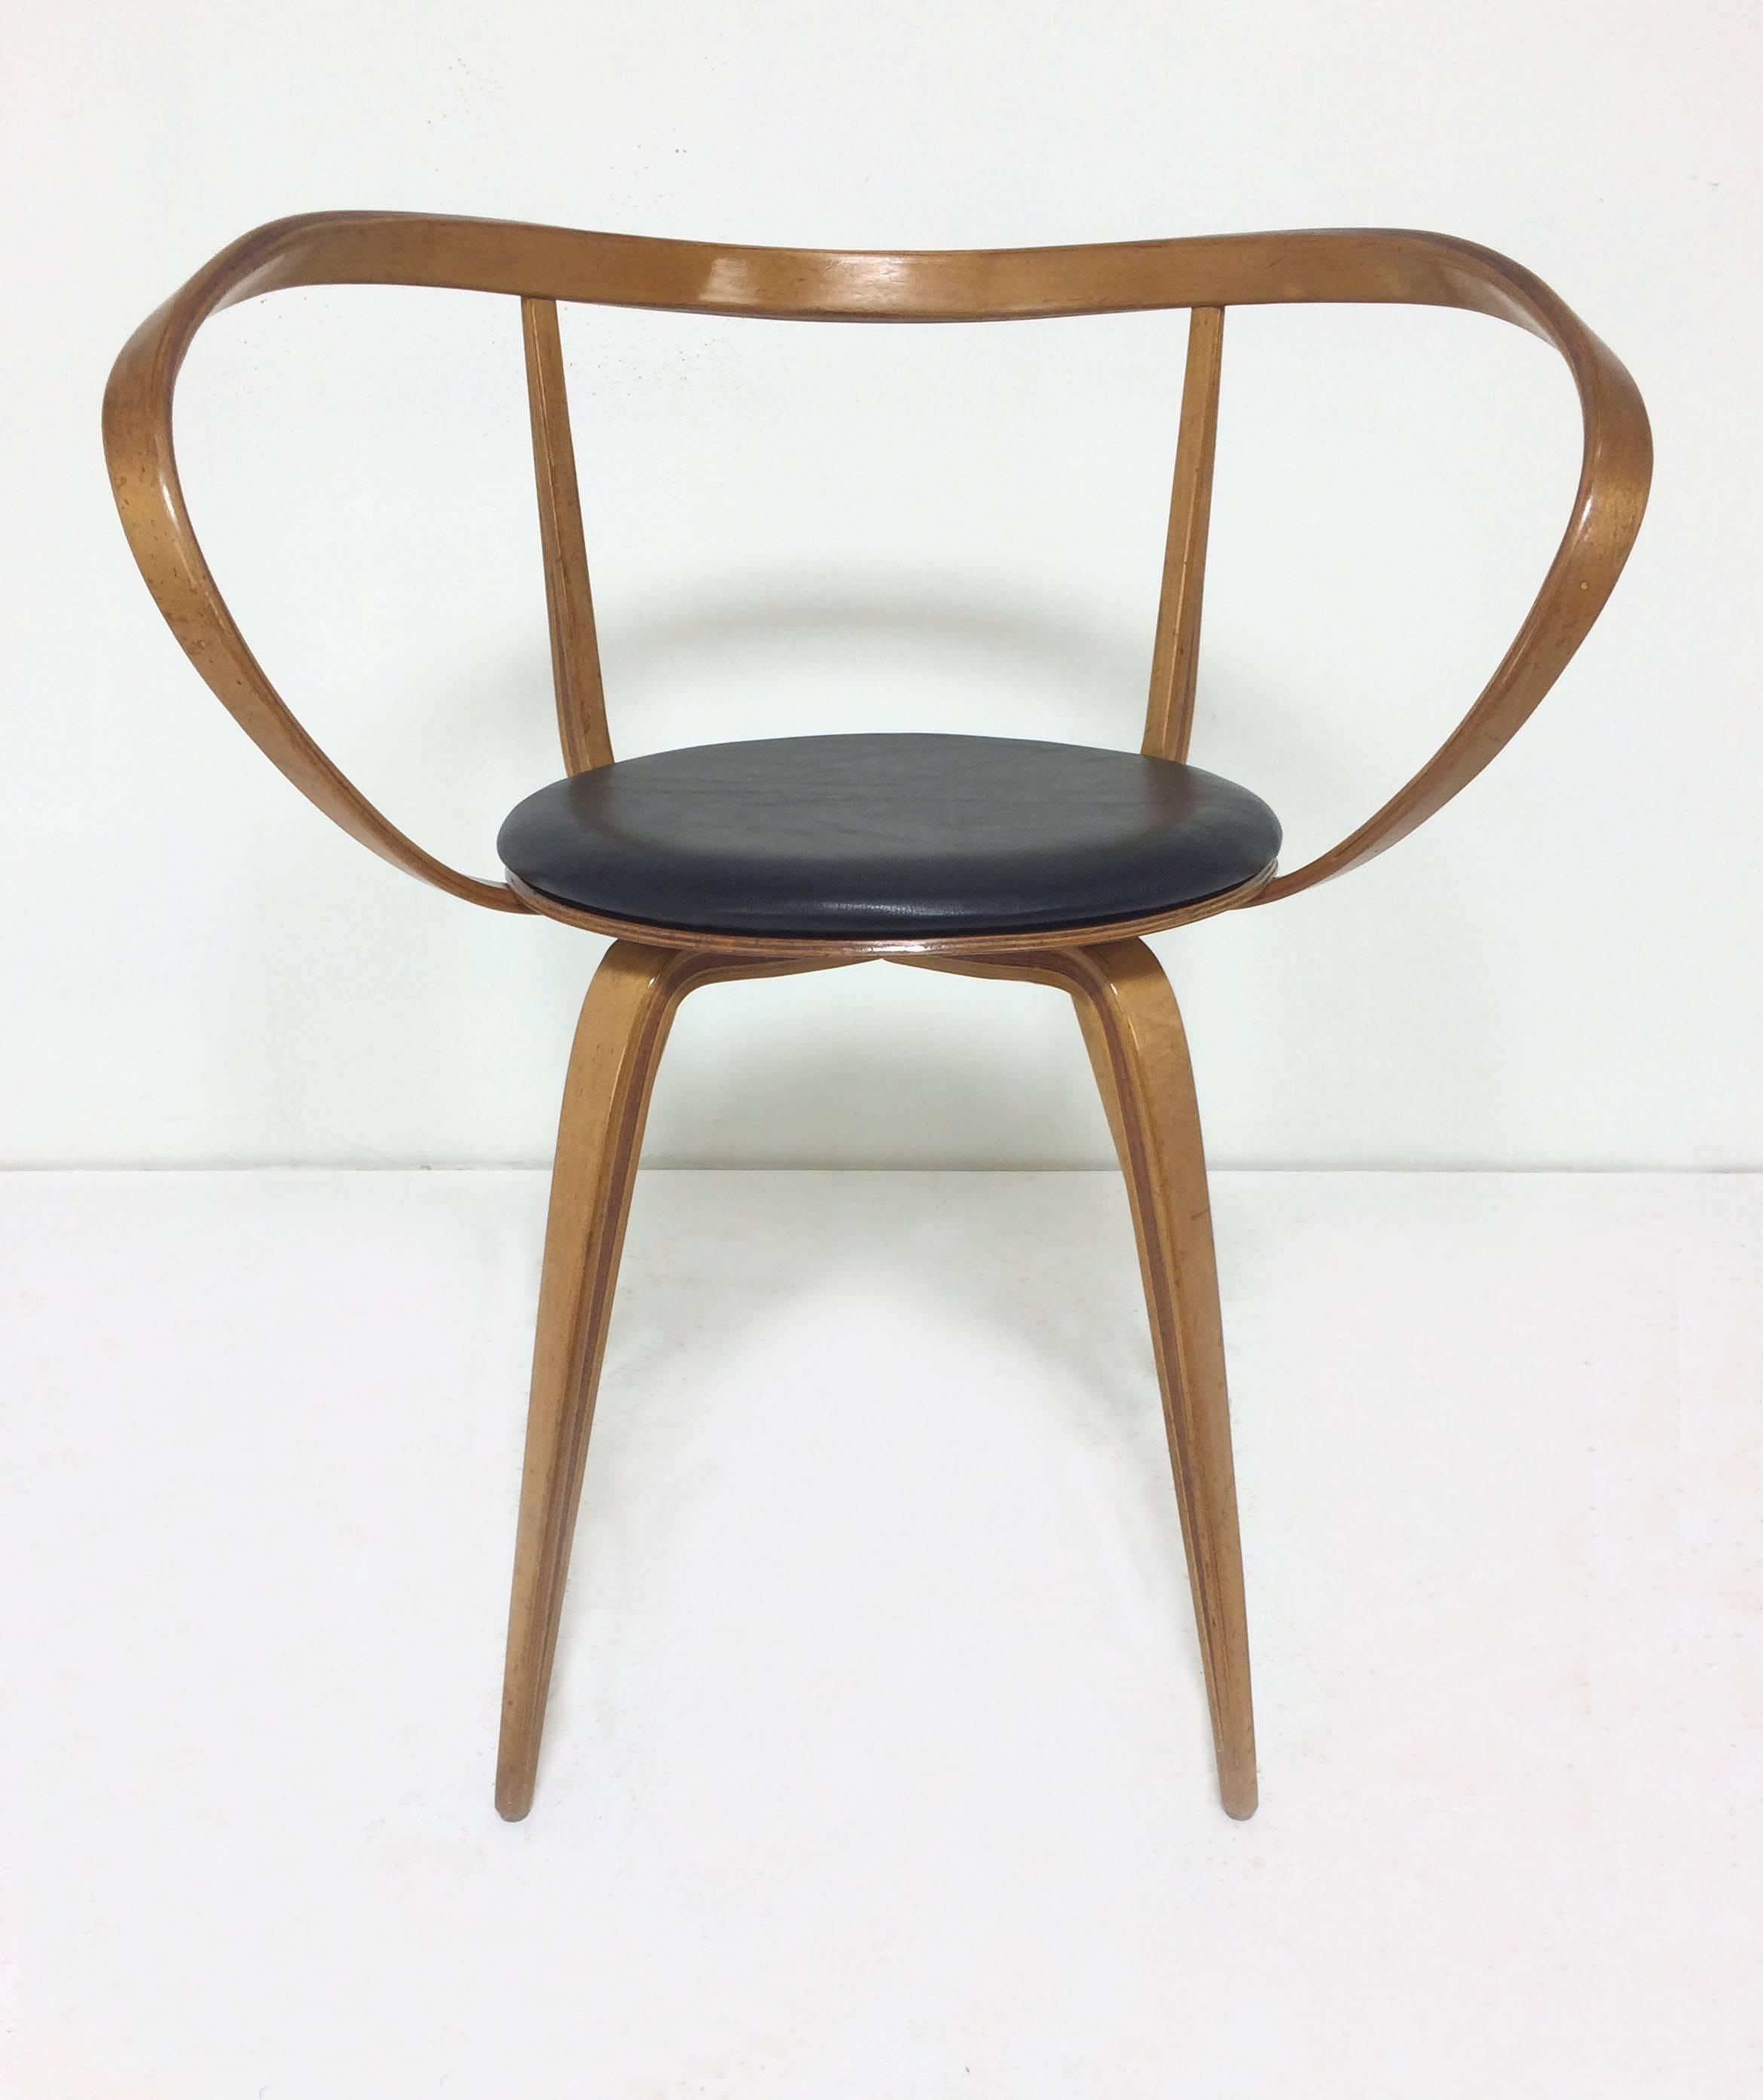 Original, circa mid-1950s, early George Nelson pretzel chair for Herman Miller. With leather seat cushion.